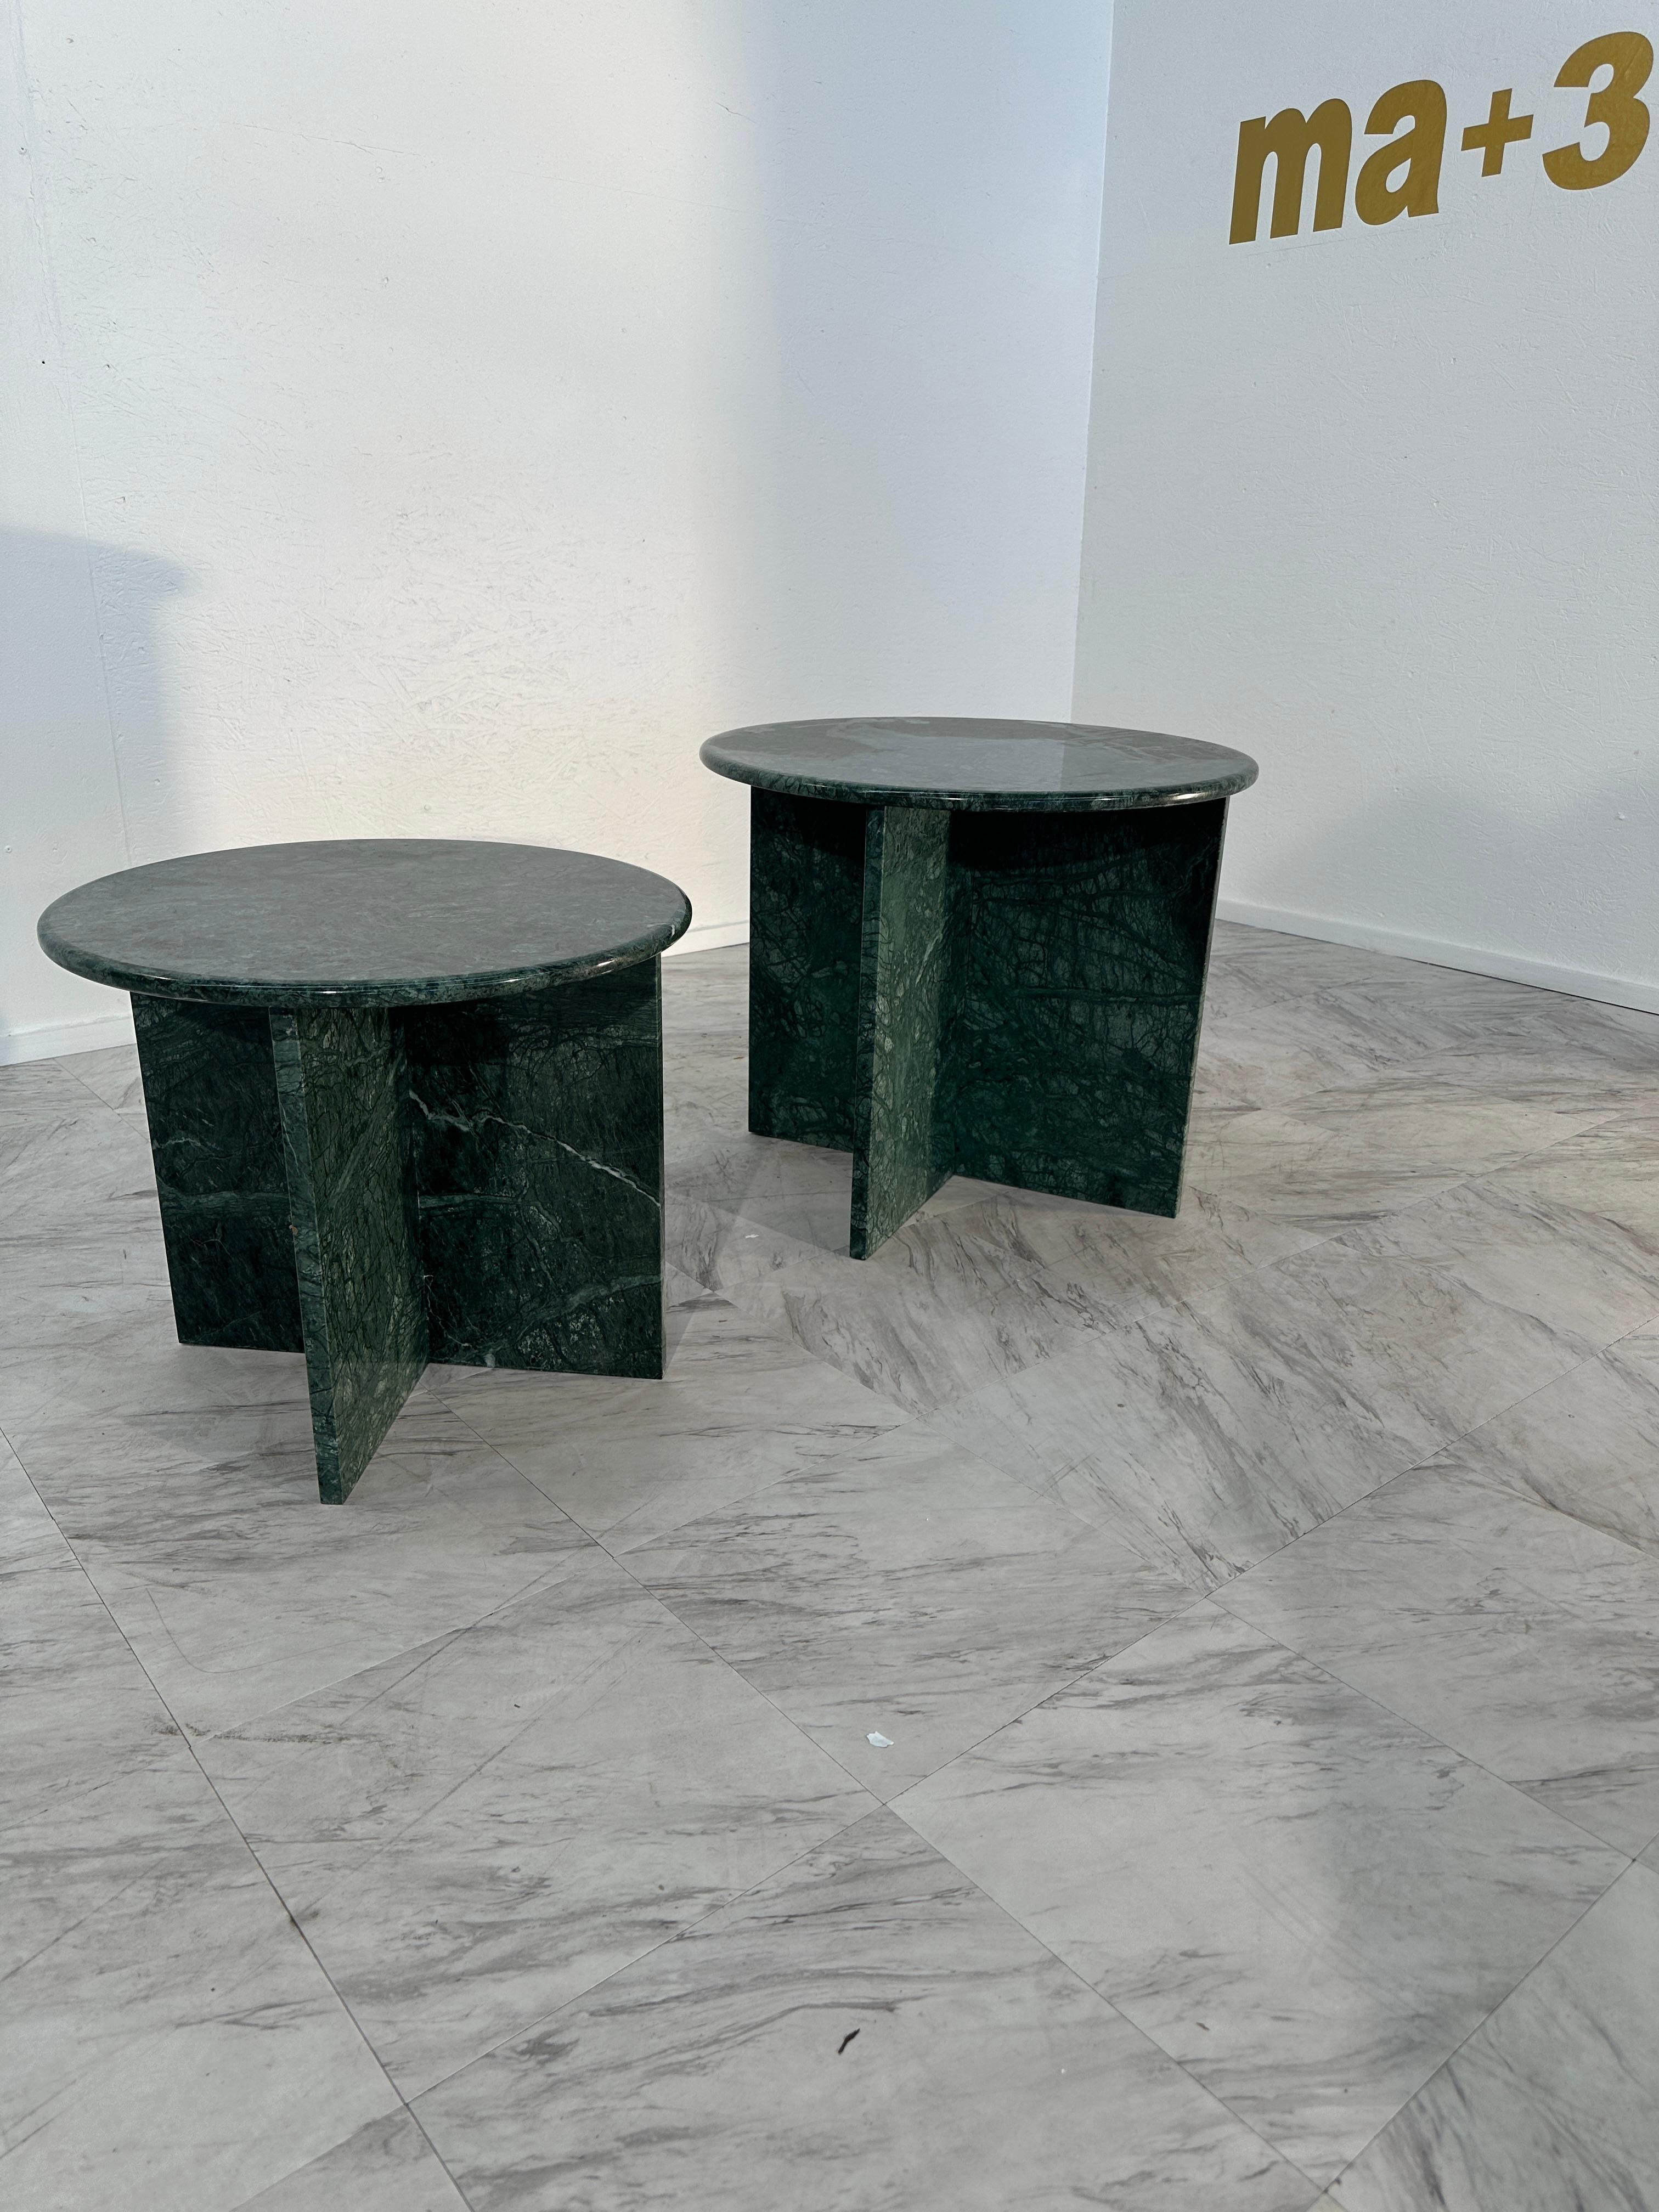 The Pair of 2 Italian Green Marble Side Tables from the 1980s features a distinctive design with a fully green marble base and round green marble tops. The elegant and timeless pieces showcase the beauty of Italian craftsmanship, combining a sleek